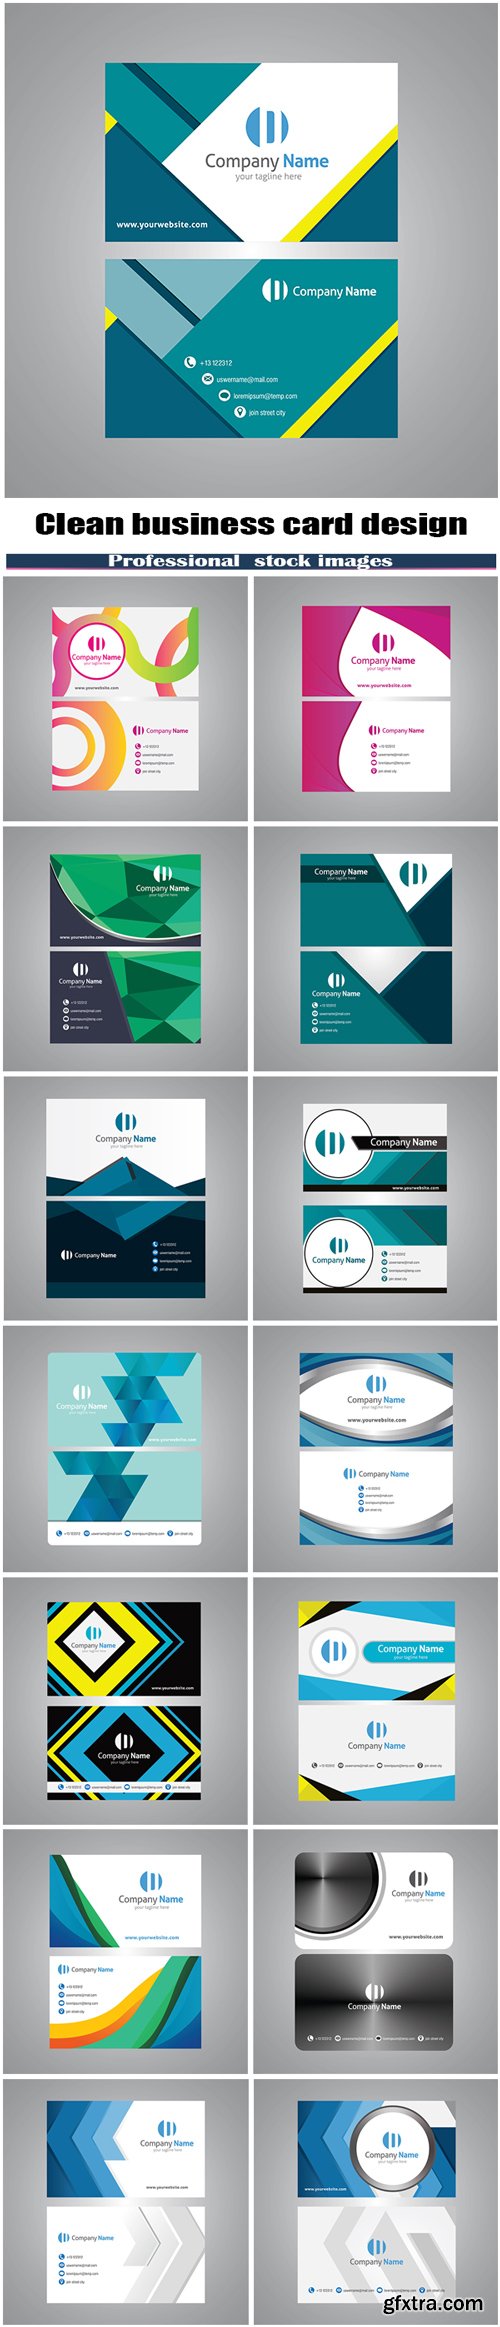 Creative and clean business card design